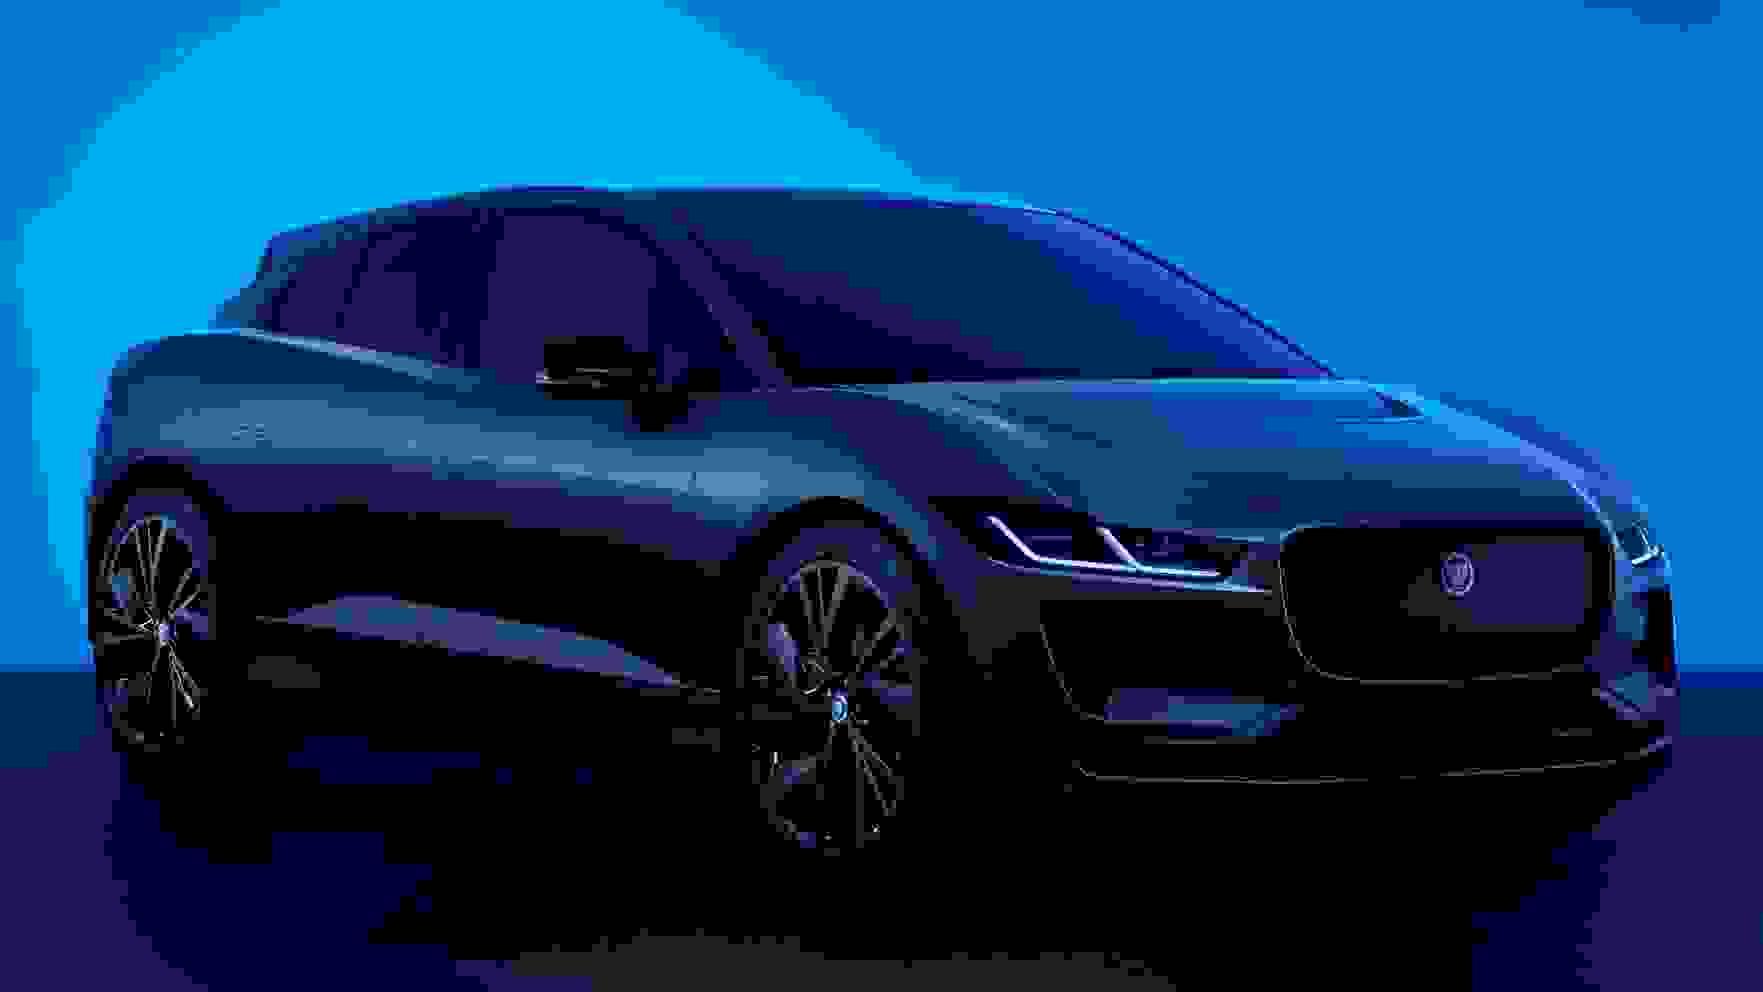 I-PACE. THE ALL-ELECTRIC PERFORMANCE SUV.